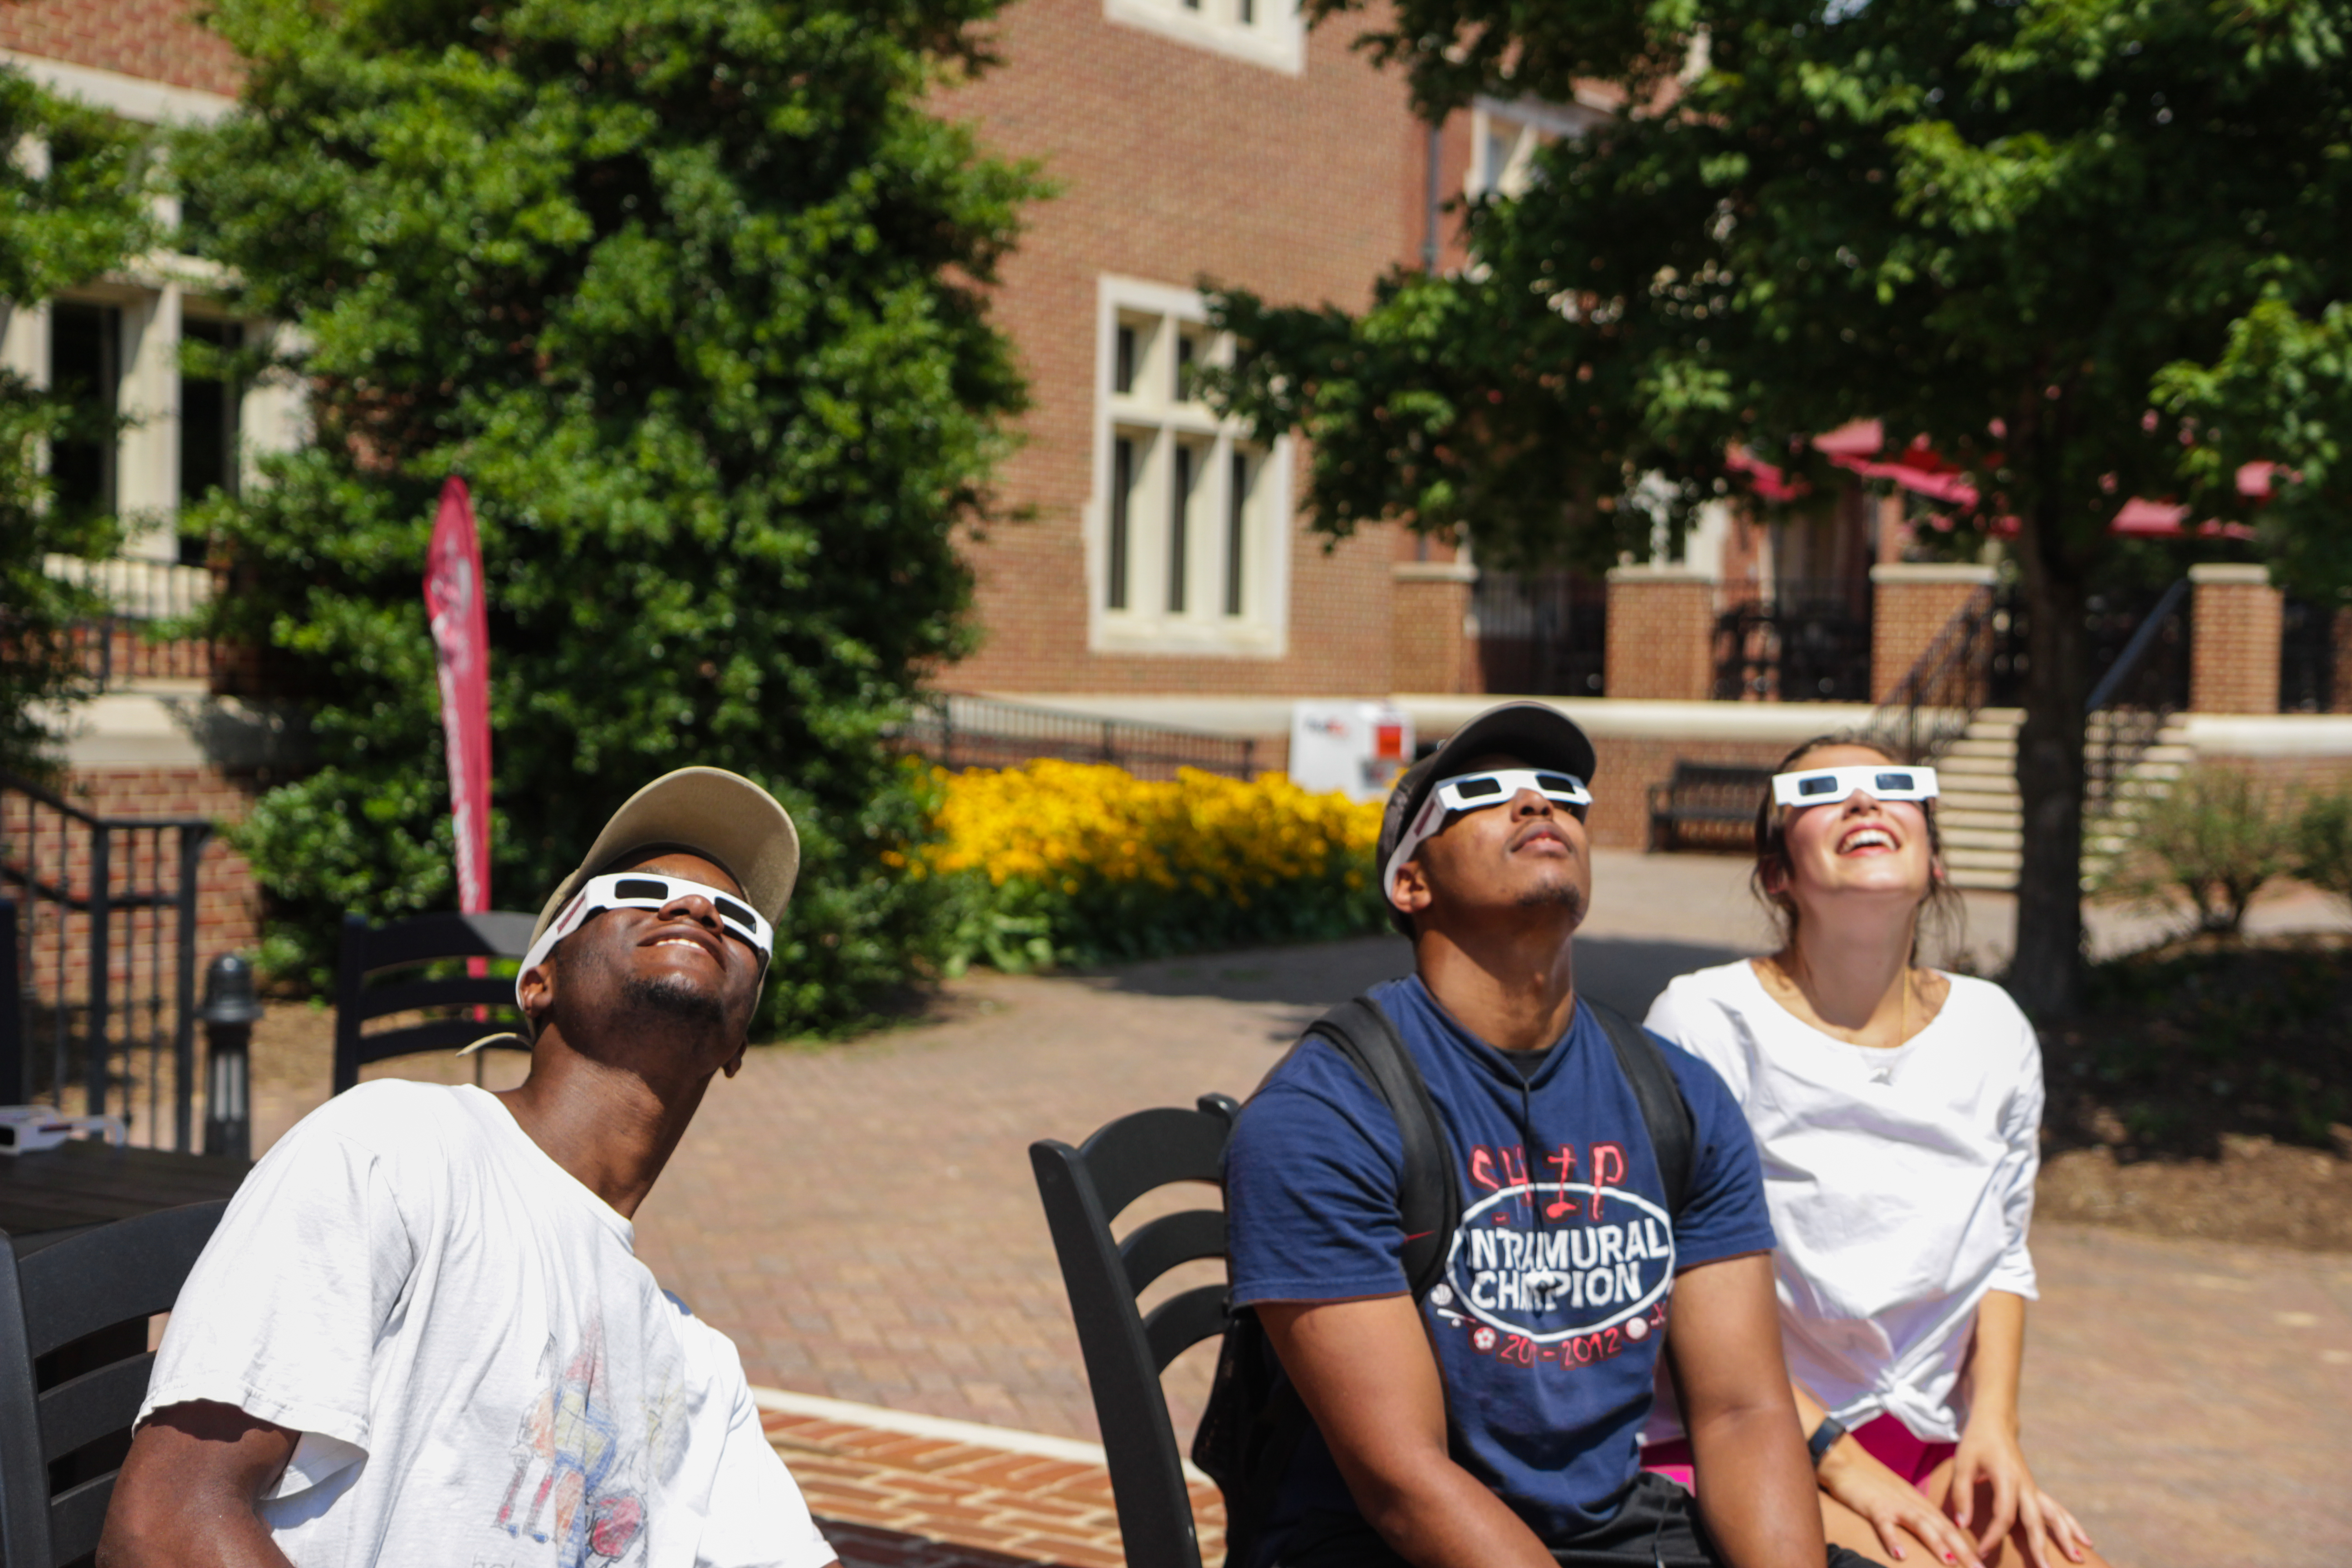 Students in front of Colket center watching eclipse